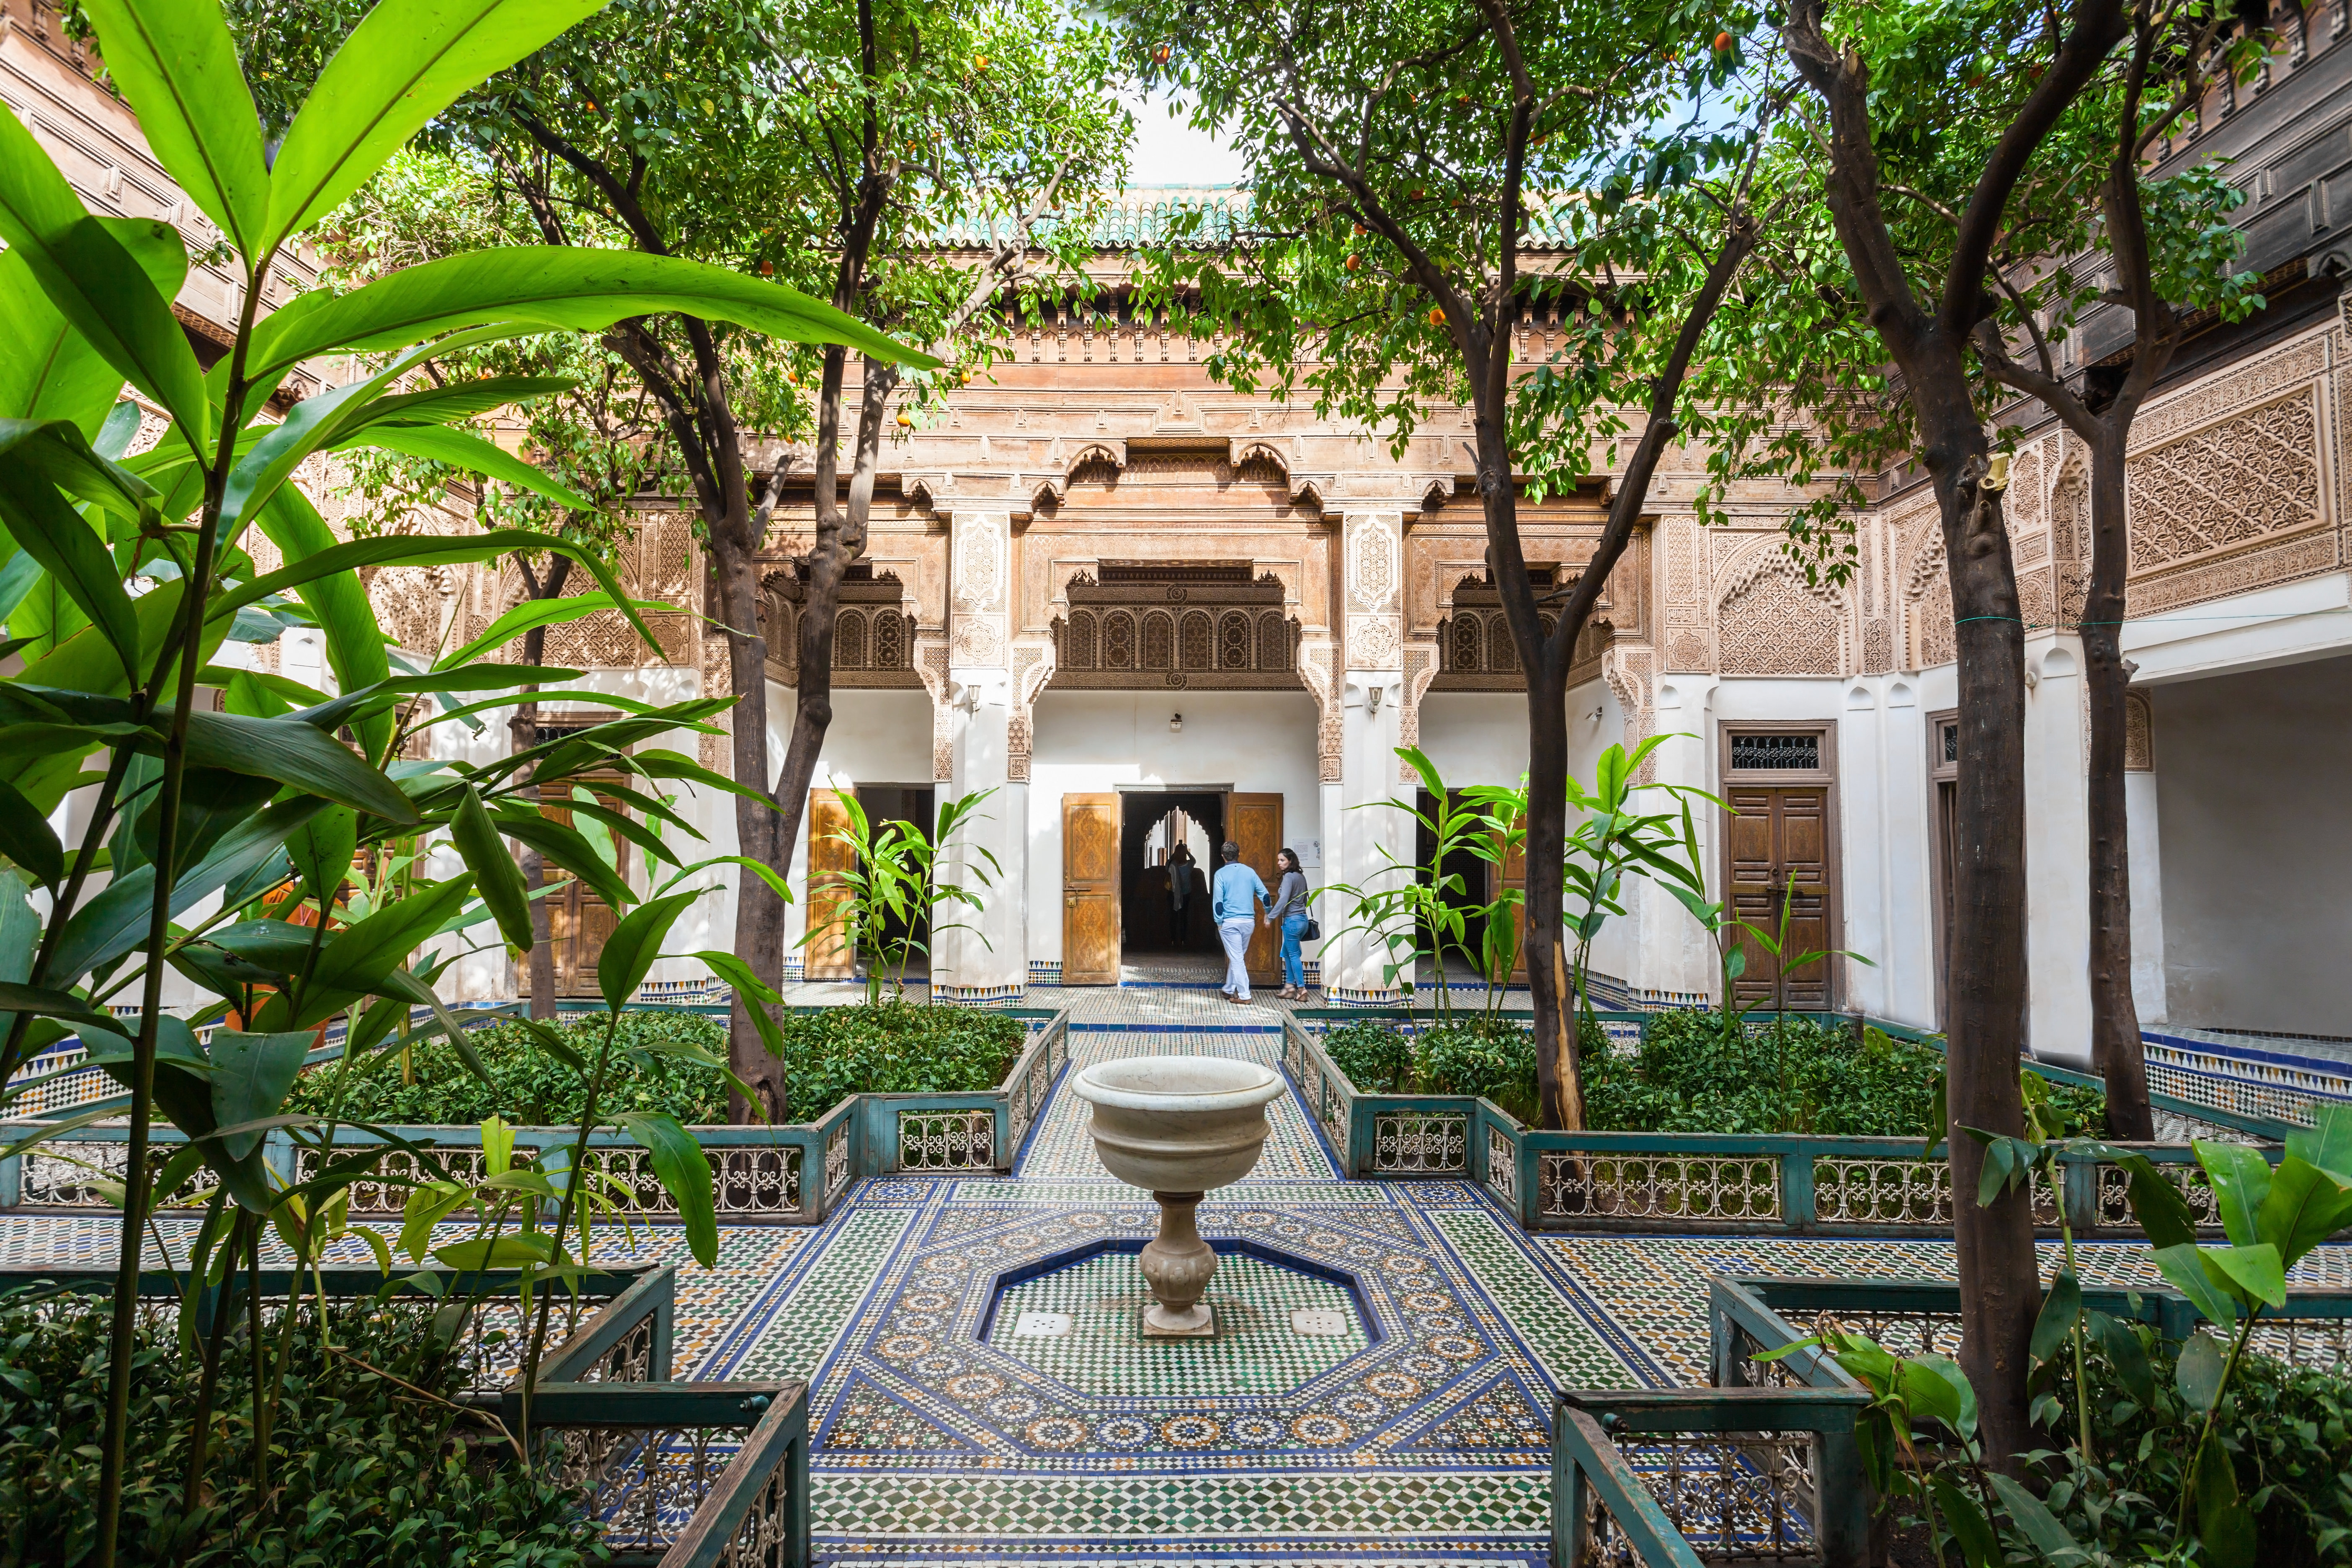 A grand, tiled courtyard with a number of raised flower beds, from which large leafy trees grow.